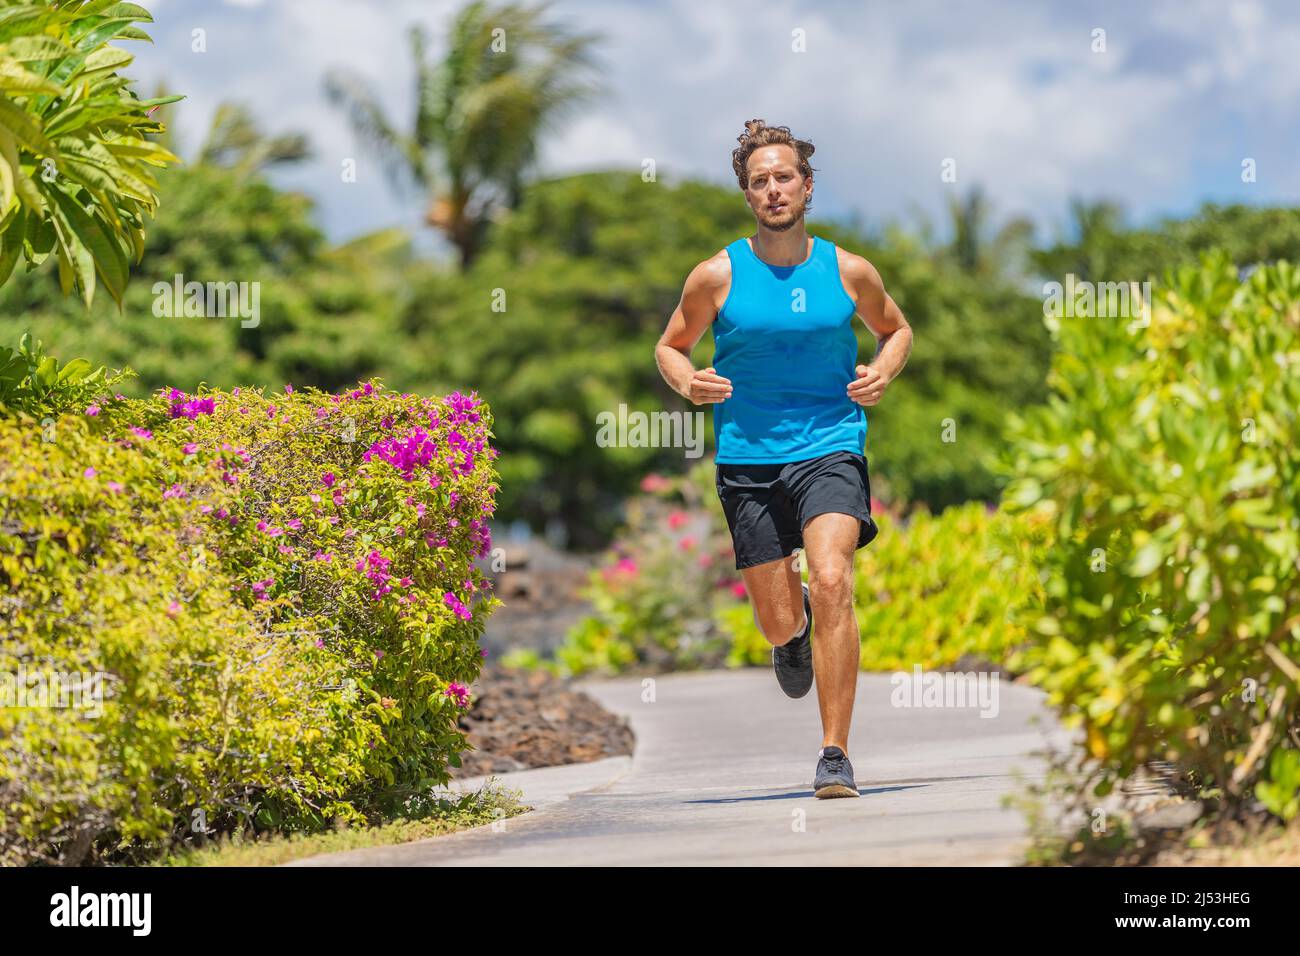 Fitness man getting in shape jogging outside on sidewalk training cardio for weight loss. Runner running in summer active lifestyle Stock Photo